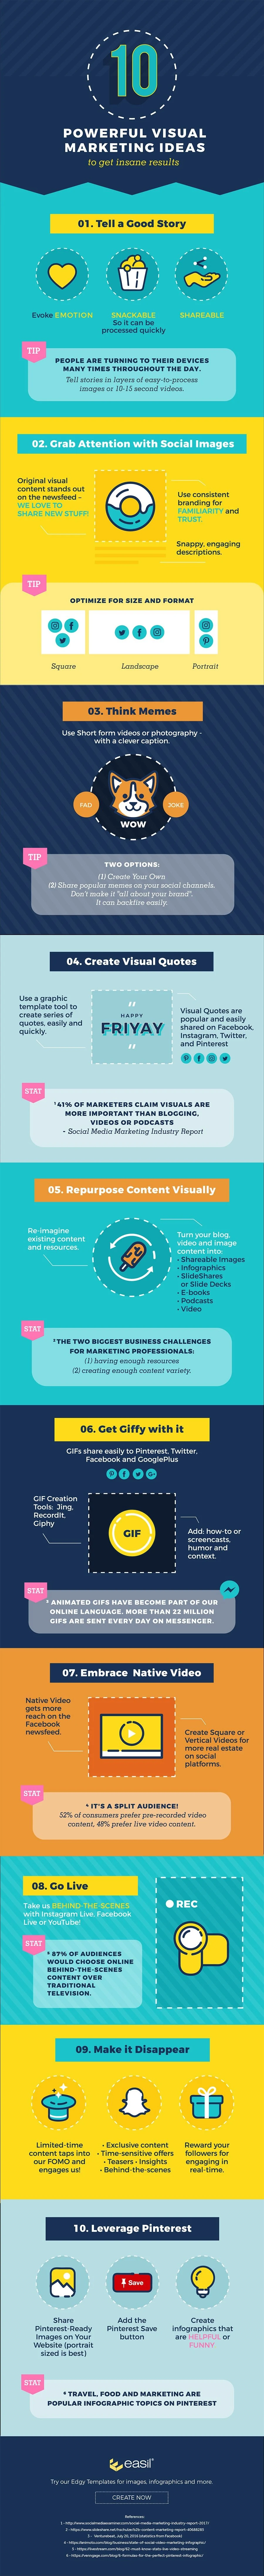 10 Powerful Visual Marketing Ideas to Get Insane Results - #Infographic